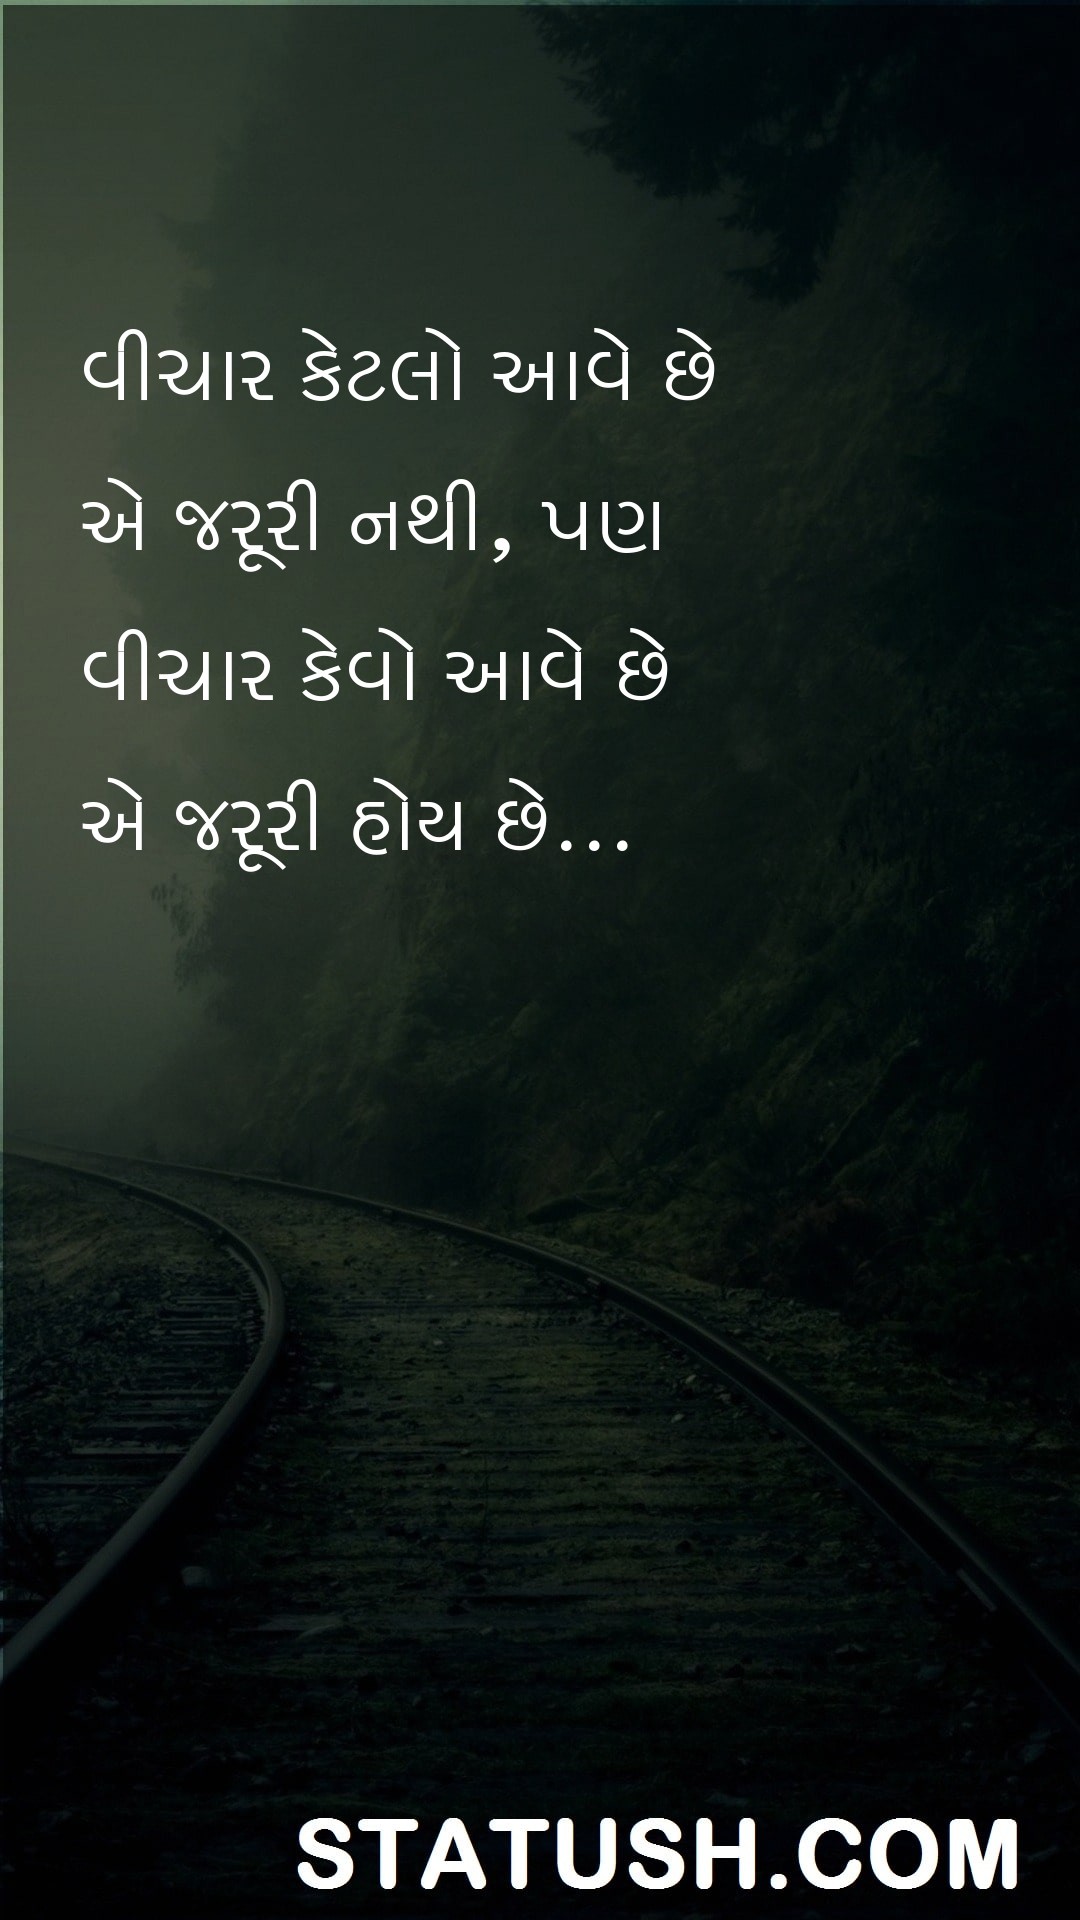 It is not necessary to know Gujarati Quotes at statush.com